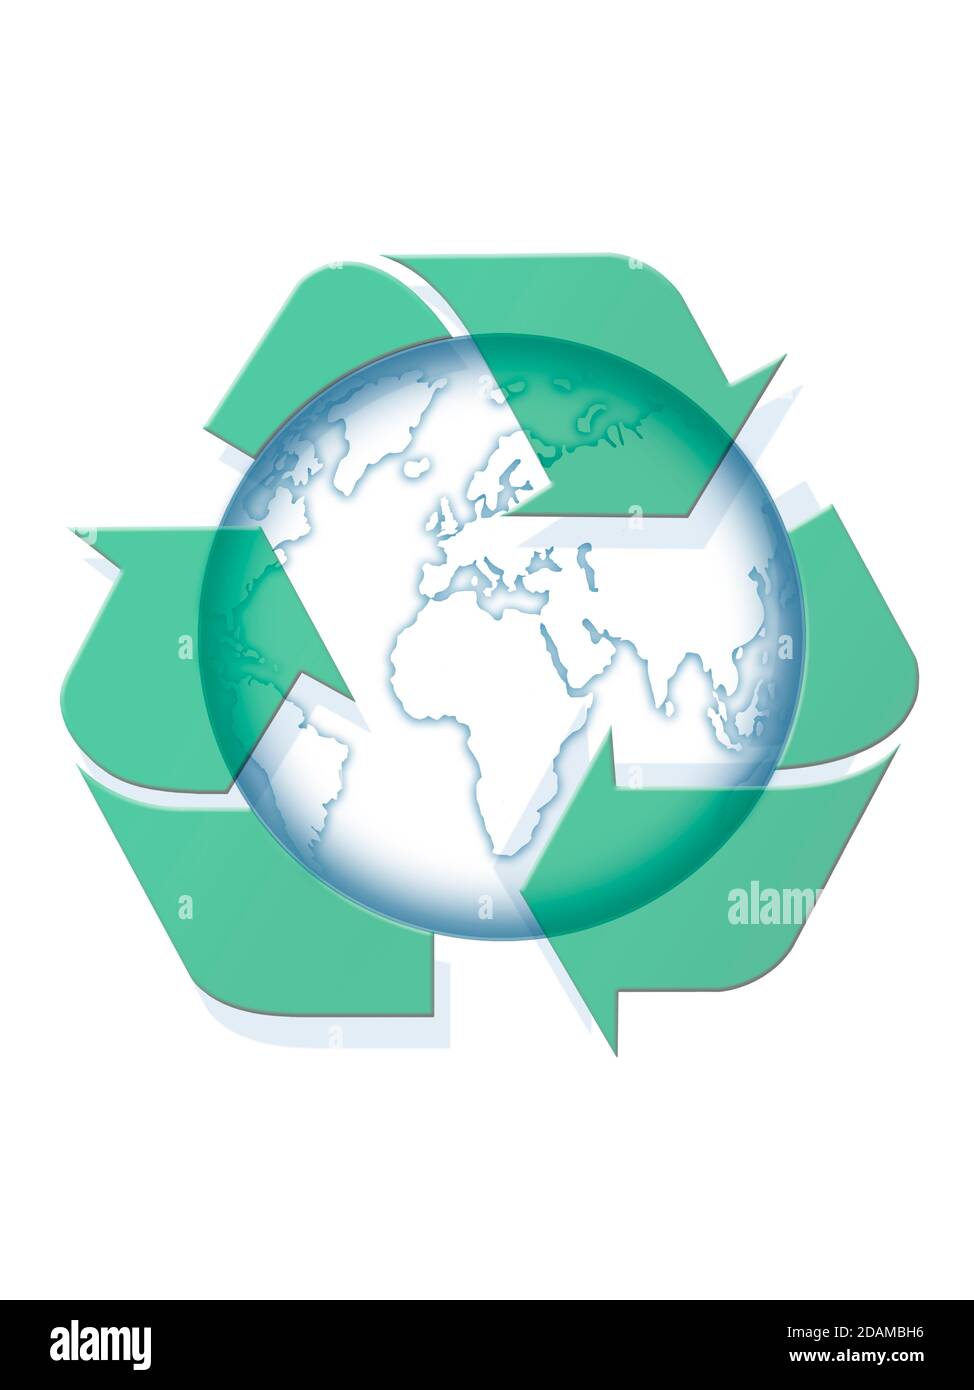 Earth with recycling symbol, illustration. Stock Photo